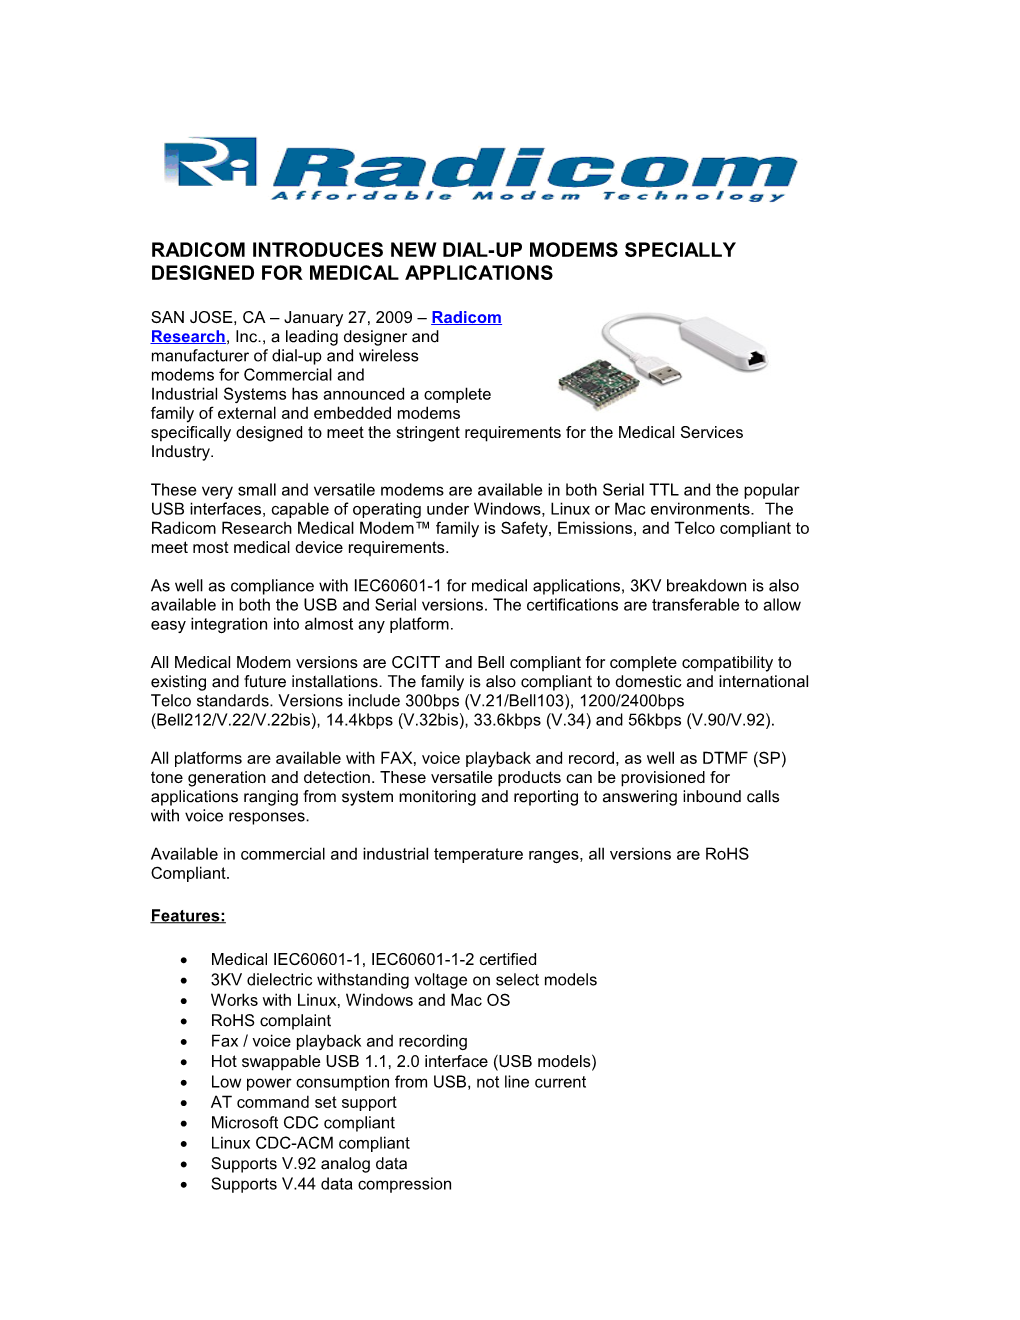 Radicom Introduces New Dial-Up Modems Specially Designed for Medical Applications